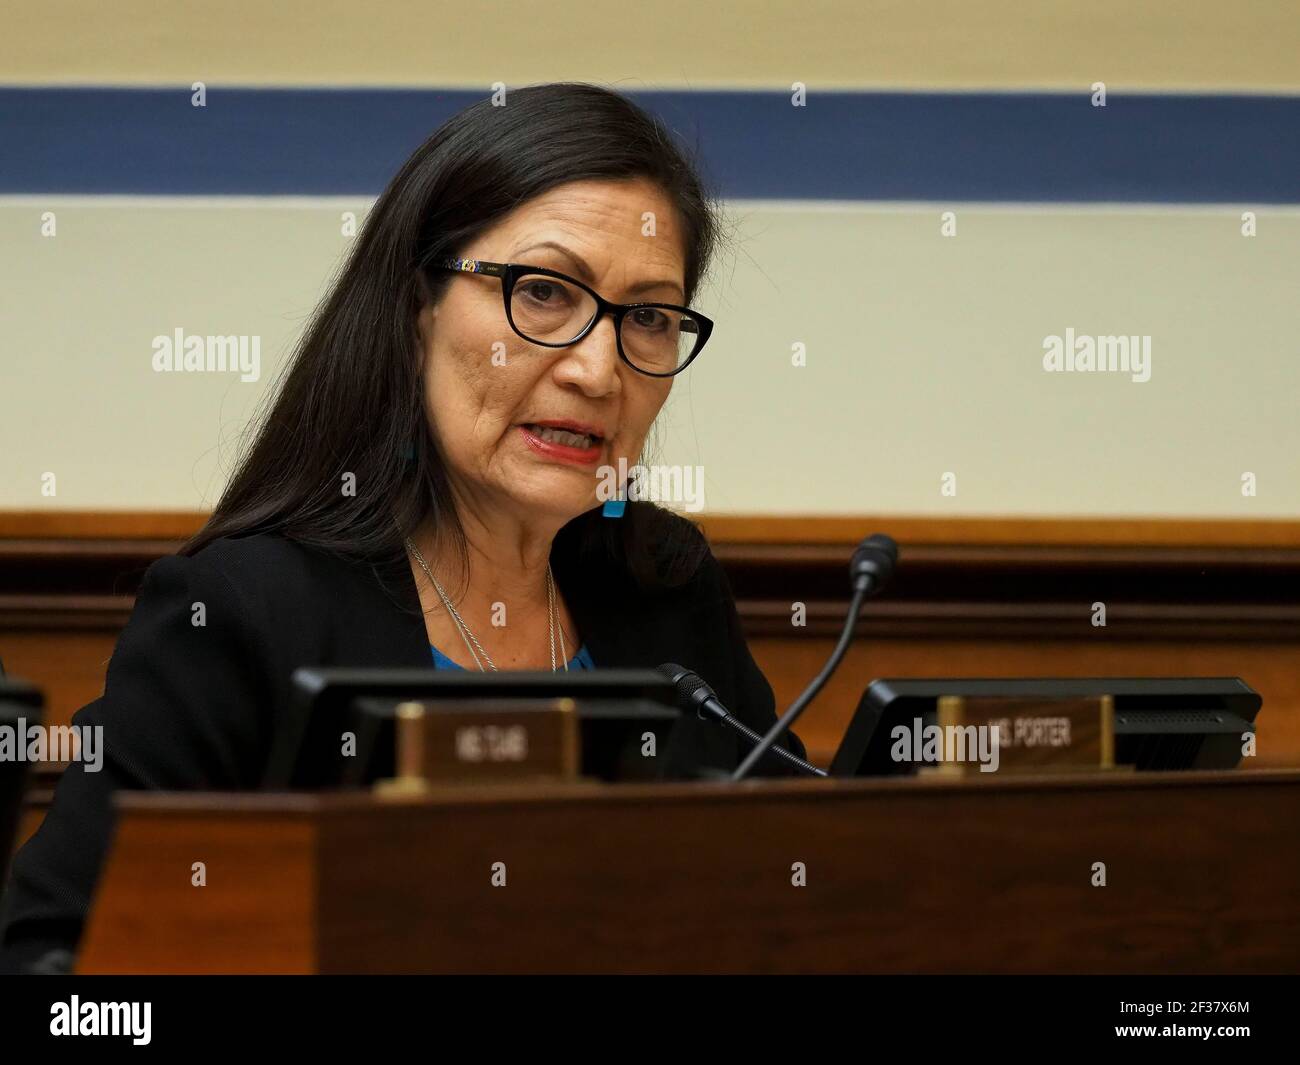 Washington, District of Columbia, USA. 26th Feb, 2020. Rep. DEB HAALAND (NM-01) attends a Congressional hearing during Black History Month on the civil rights movement and protecting the right to vote. Credit: Sue Dorfman/ZUMA Wire/Alamy Live News Stock Photo